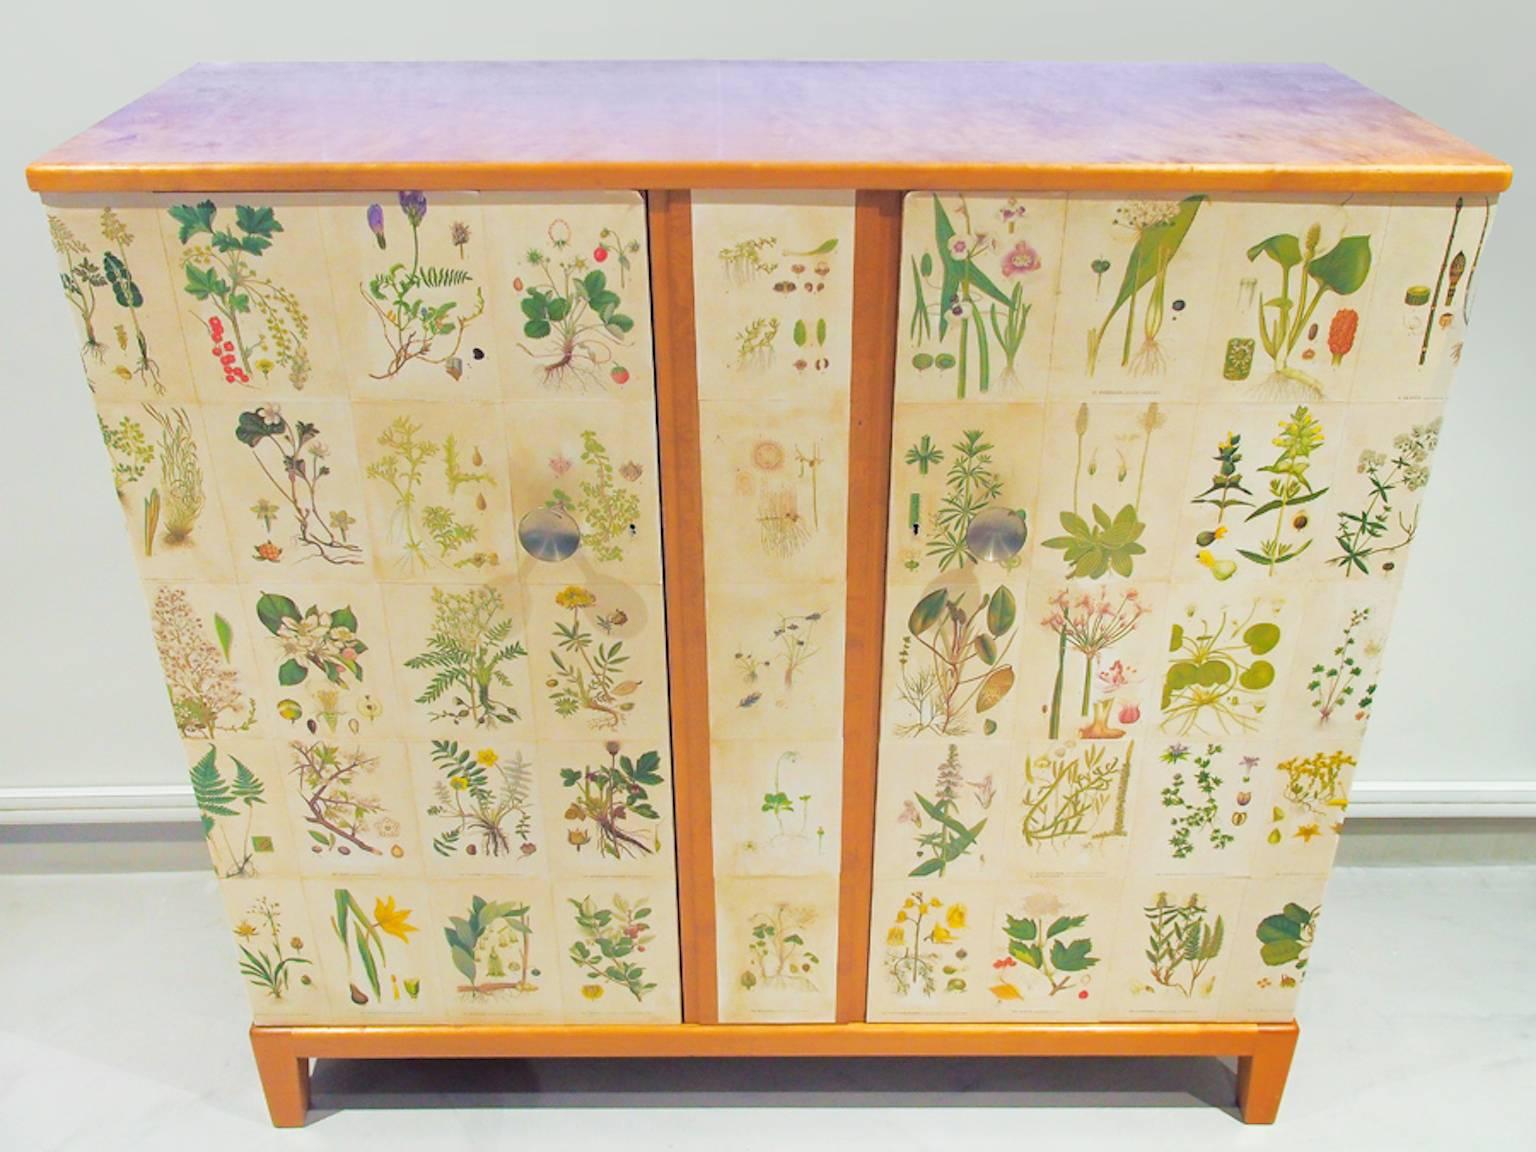 1960s birch cabinet decorated with printed paper. The flower illustrations are from the book "Nordens Flora" by Swedish botanist and botanical artist Carl Axel Magnus Lindman (1856-1928). Front with two doors enclosing two drawers and